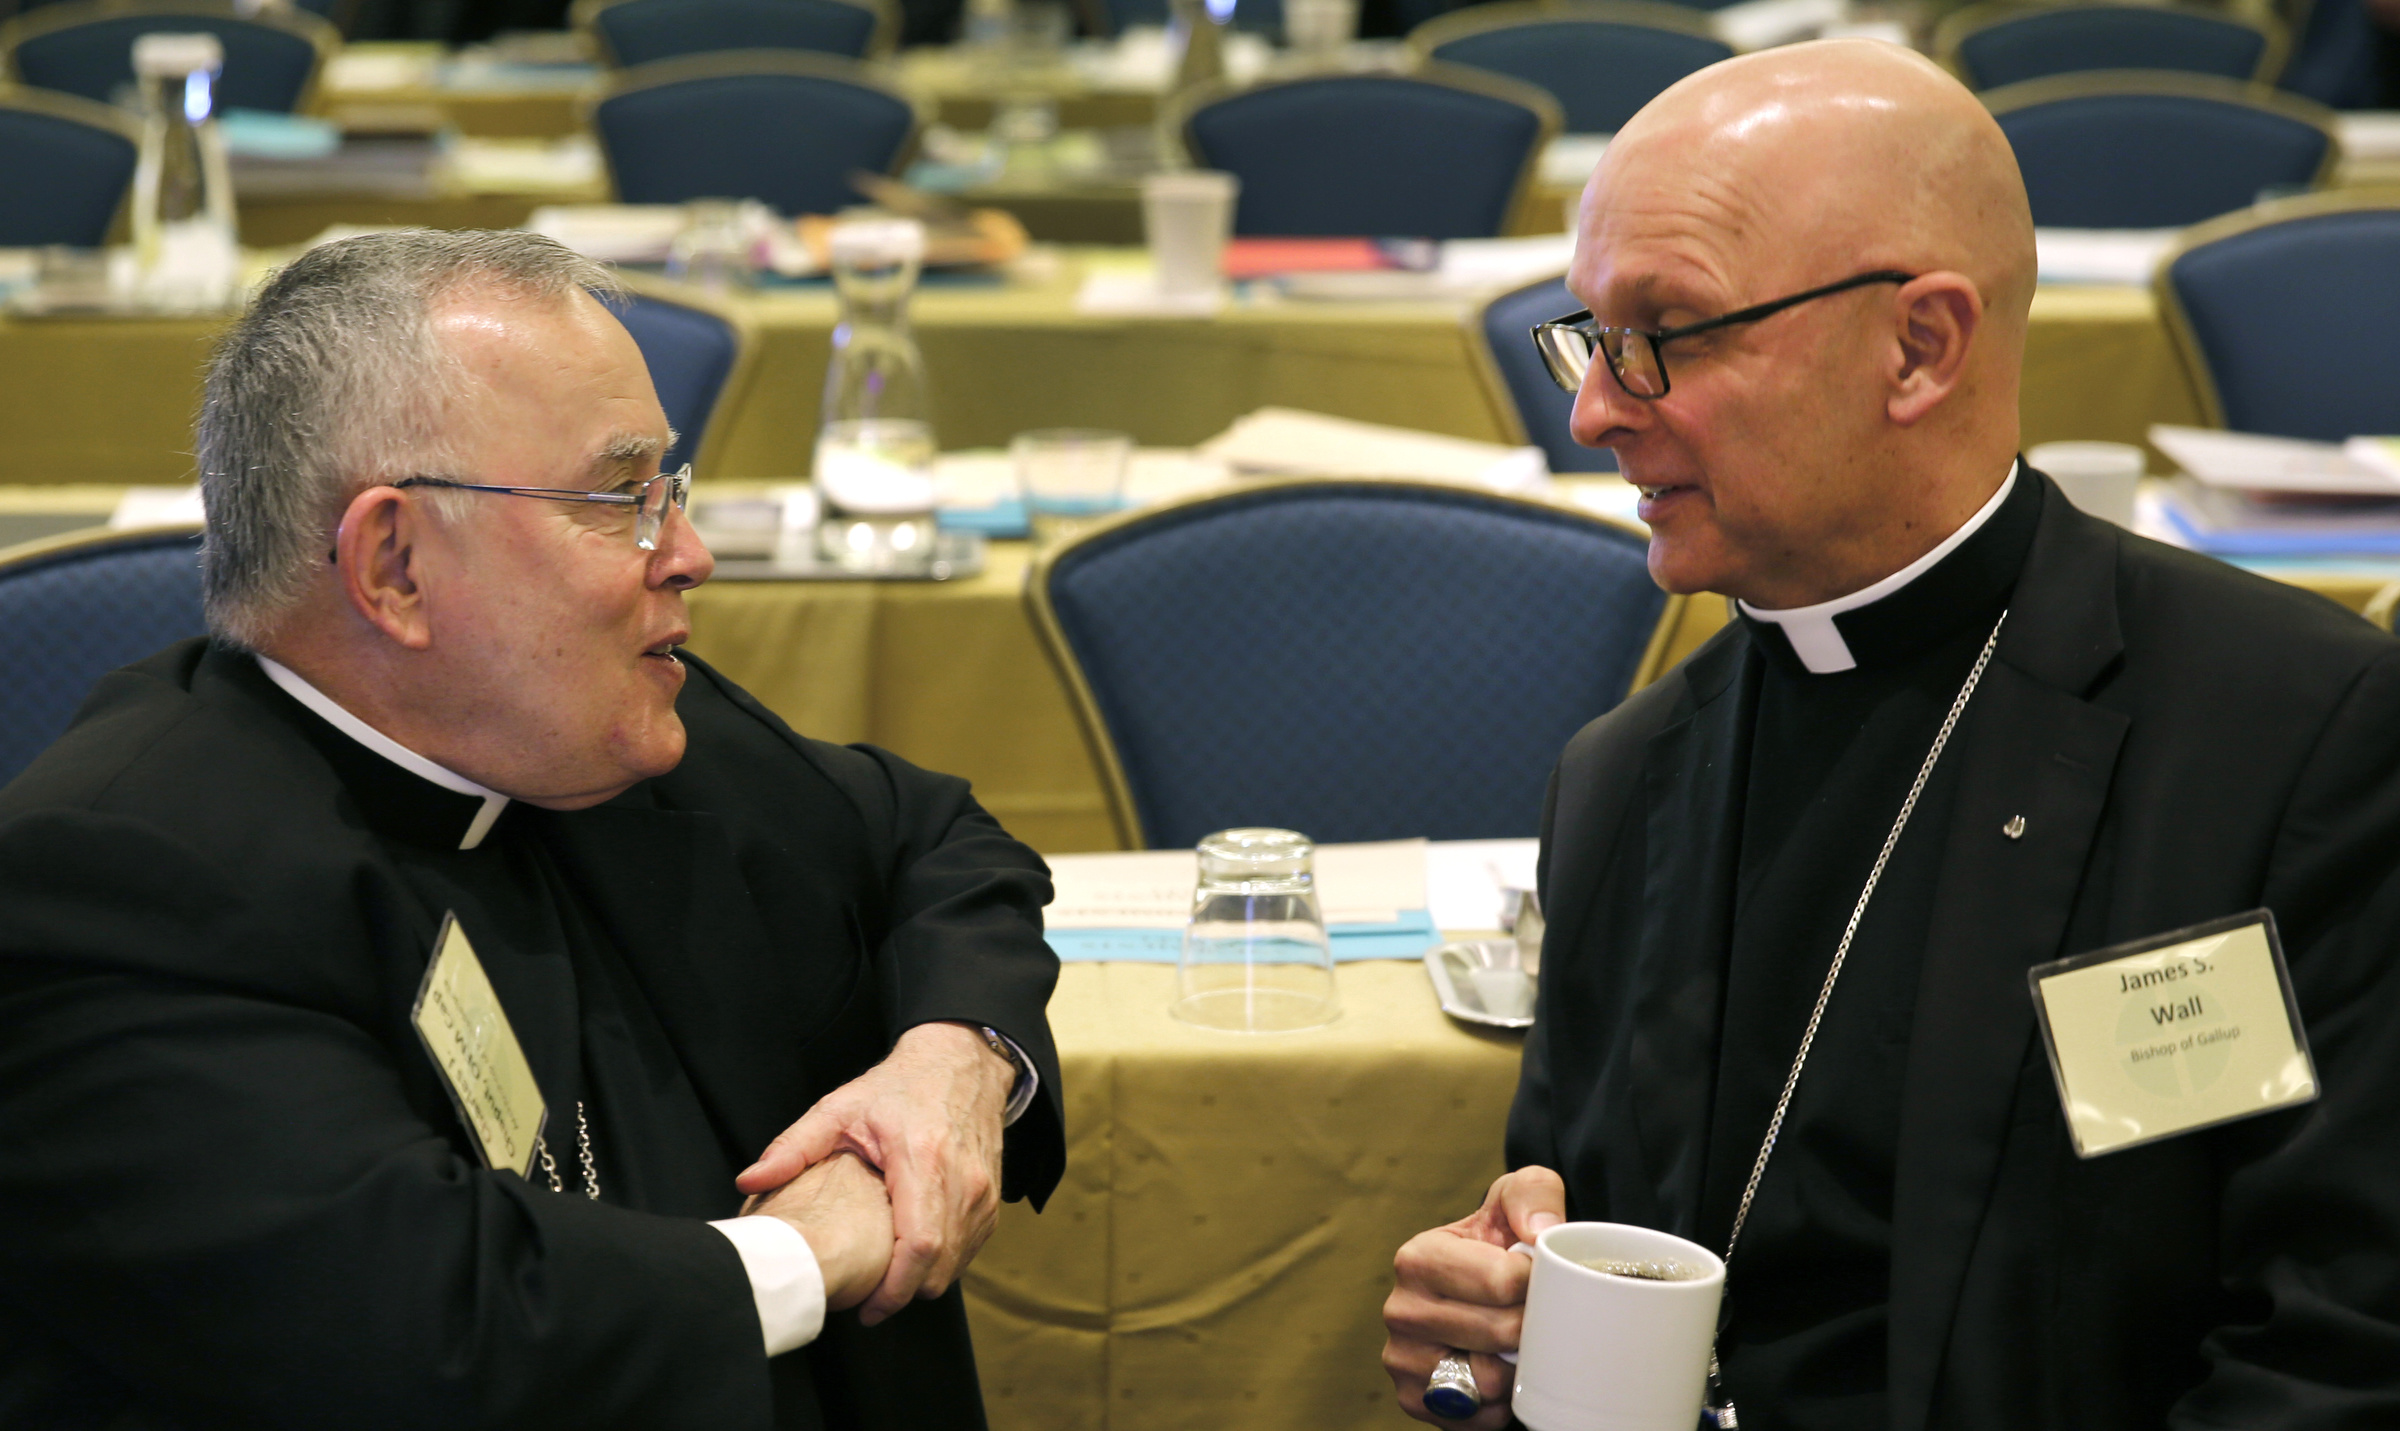 Archbishop Charles J. Chaput of Philadelphia and Bishop James S. Wall of Gallup, N.M., chat during a break at the 2015 fall general assembly of the U.S. Conference of Catholic Bishops in Baltimore Nov. 17. (CNS/Bob Roller) 